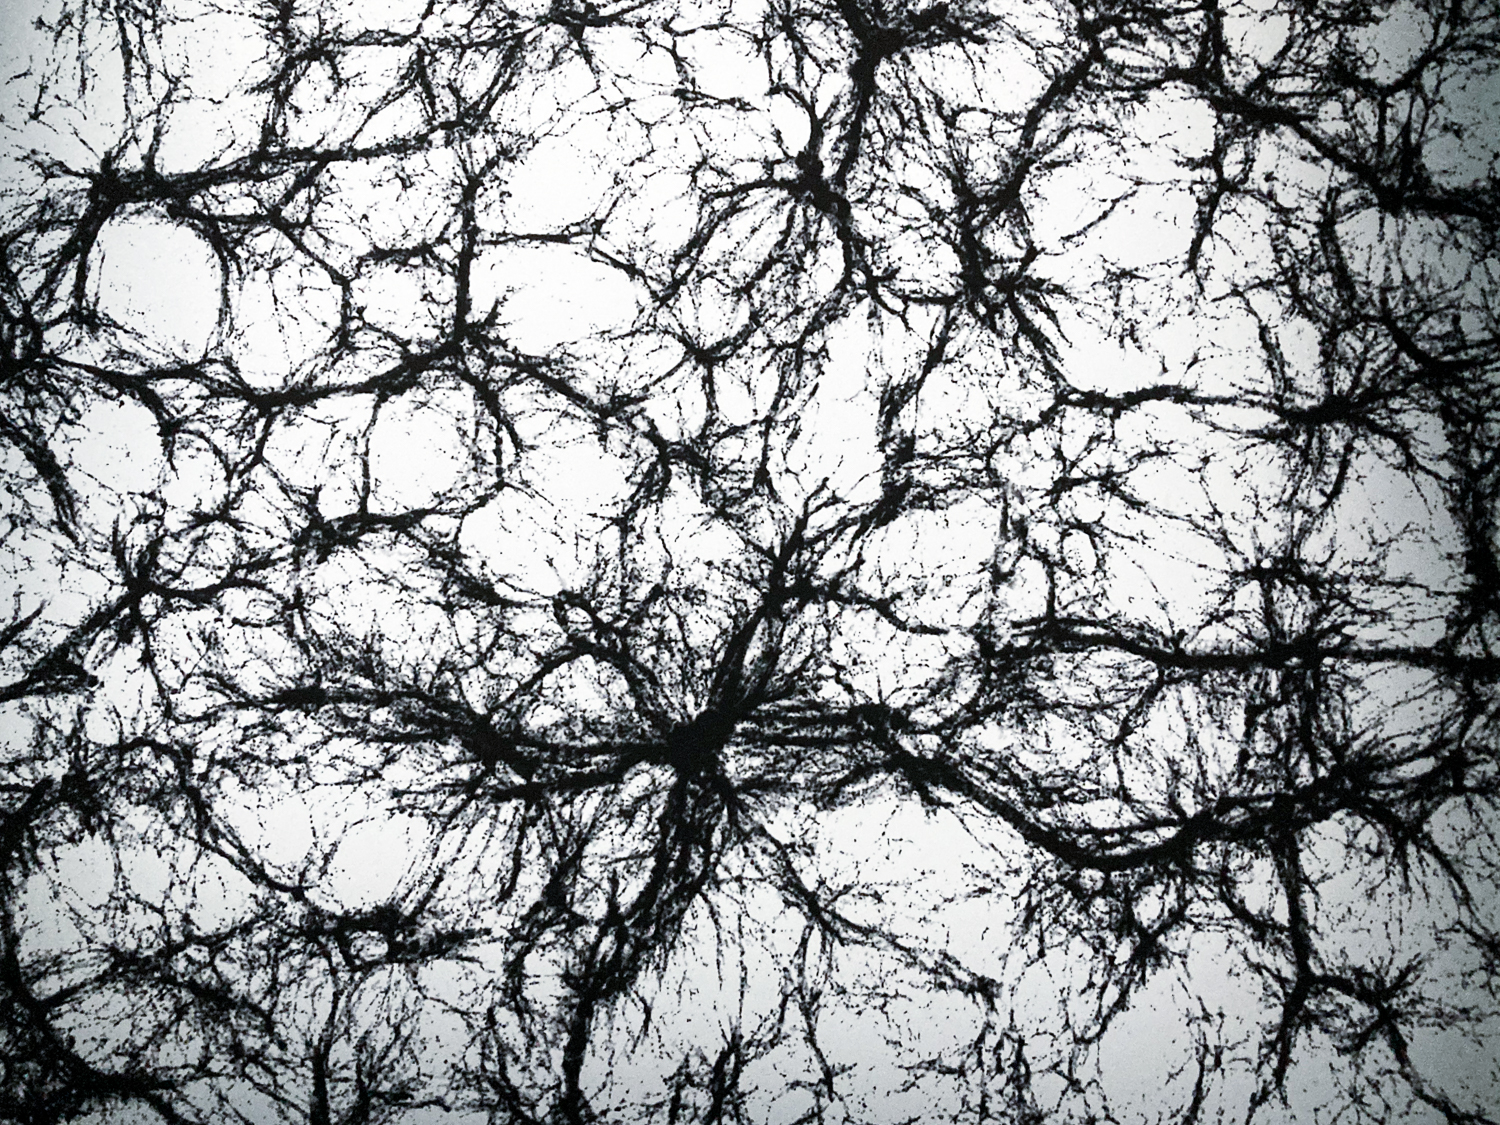 A web of black filaments against a white background